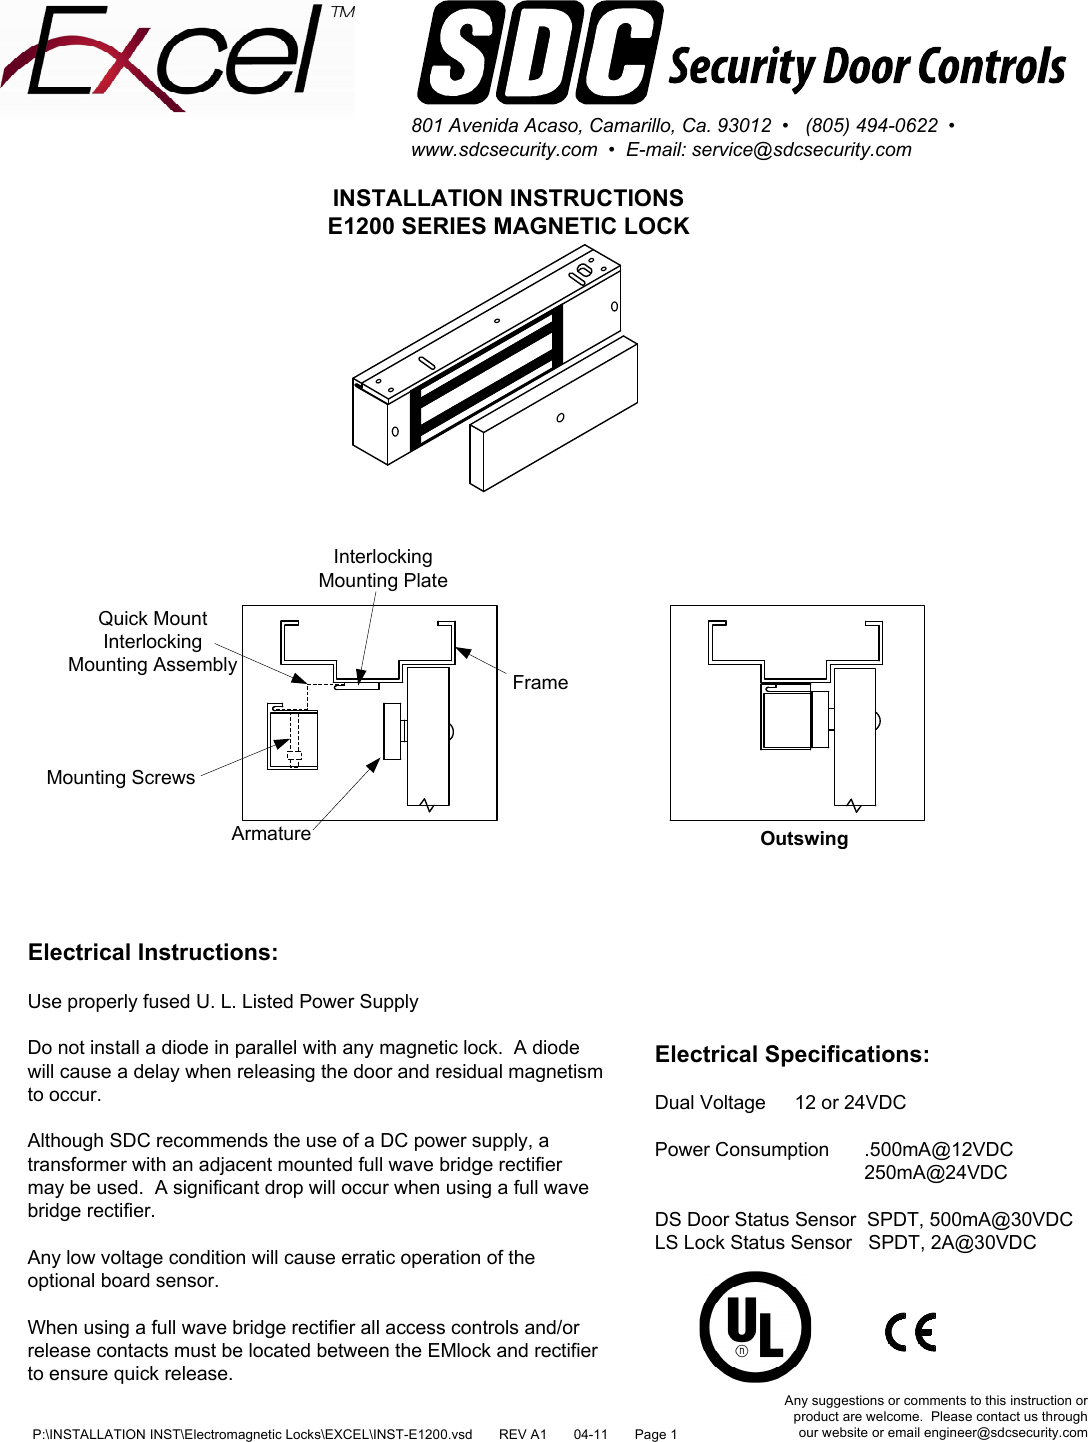 Page 1 of 4 - SDC INST-E1200 Installation Instructions E1200 Series Magnetic Lock